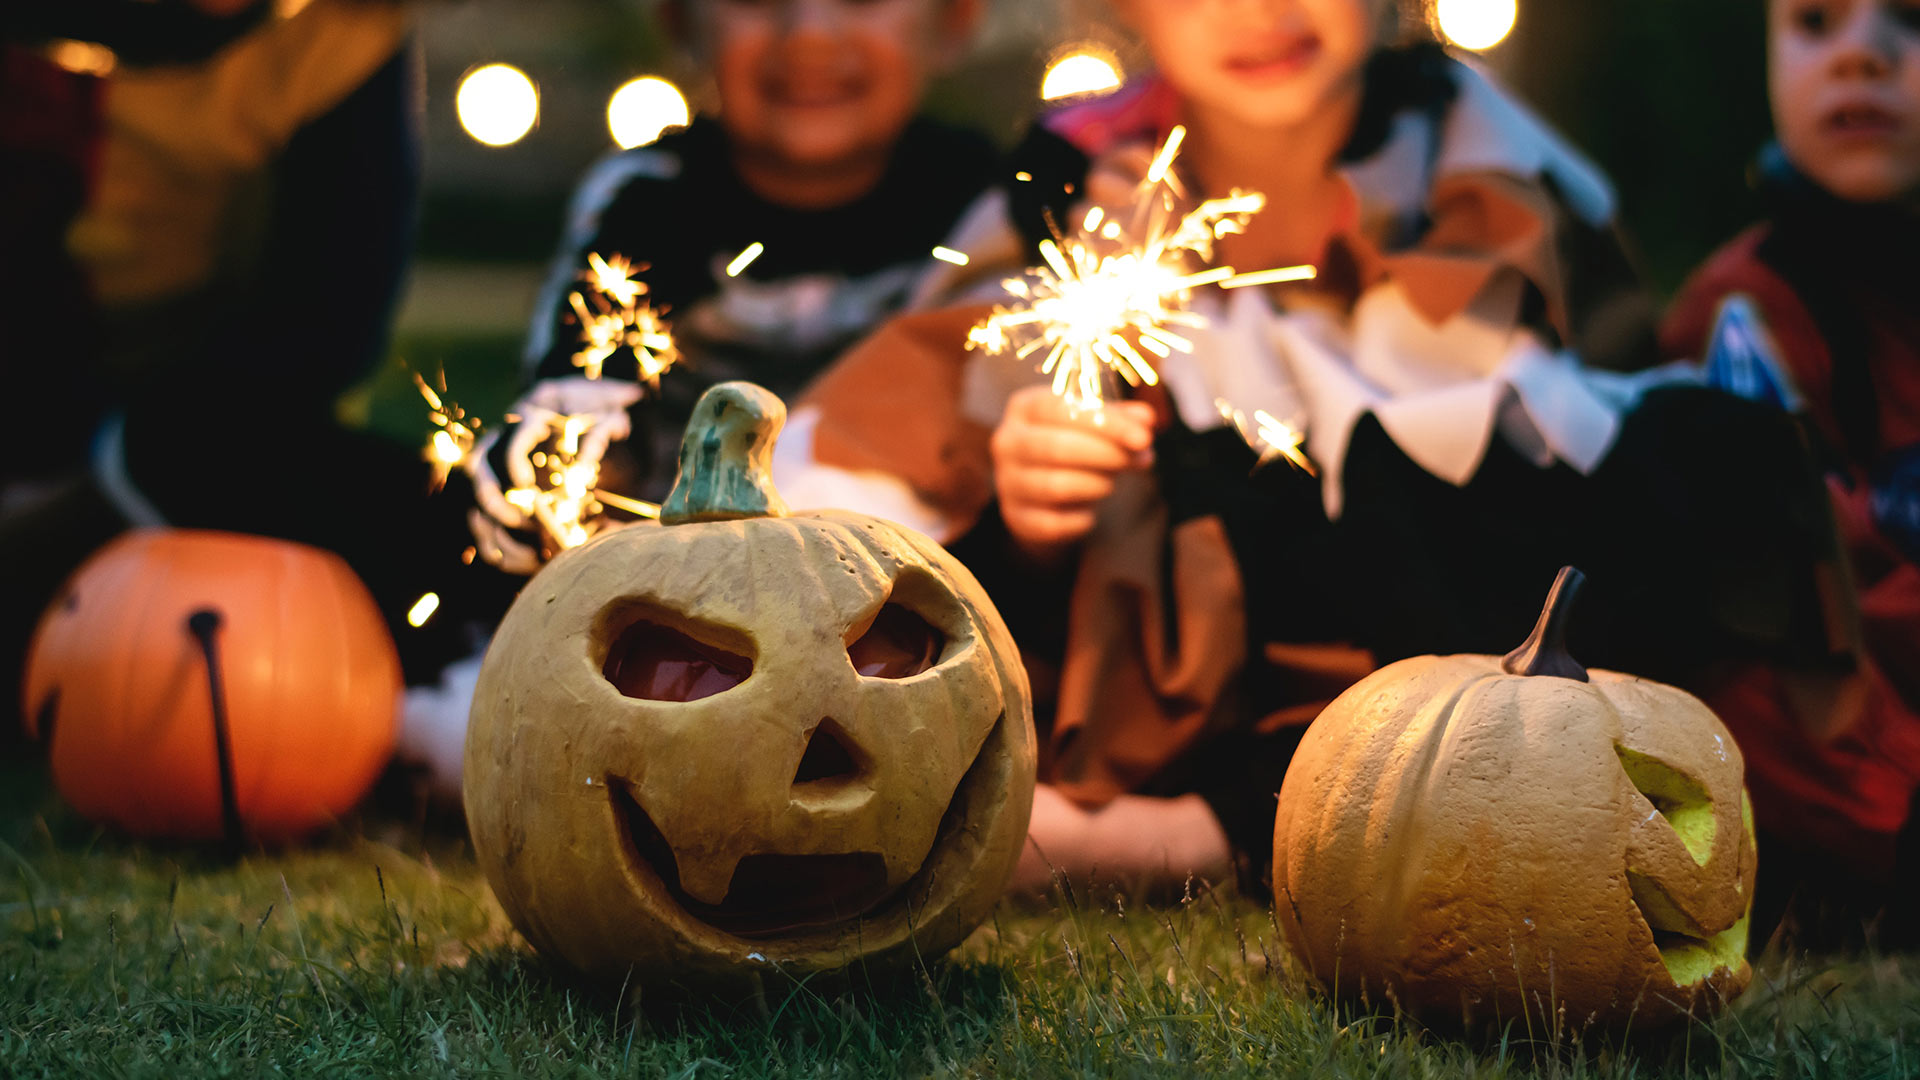 Carved pumpkins for Halloween with children holding sparklers in background